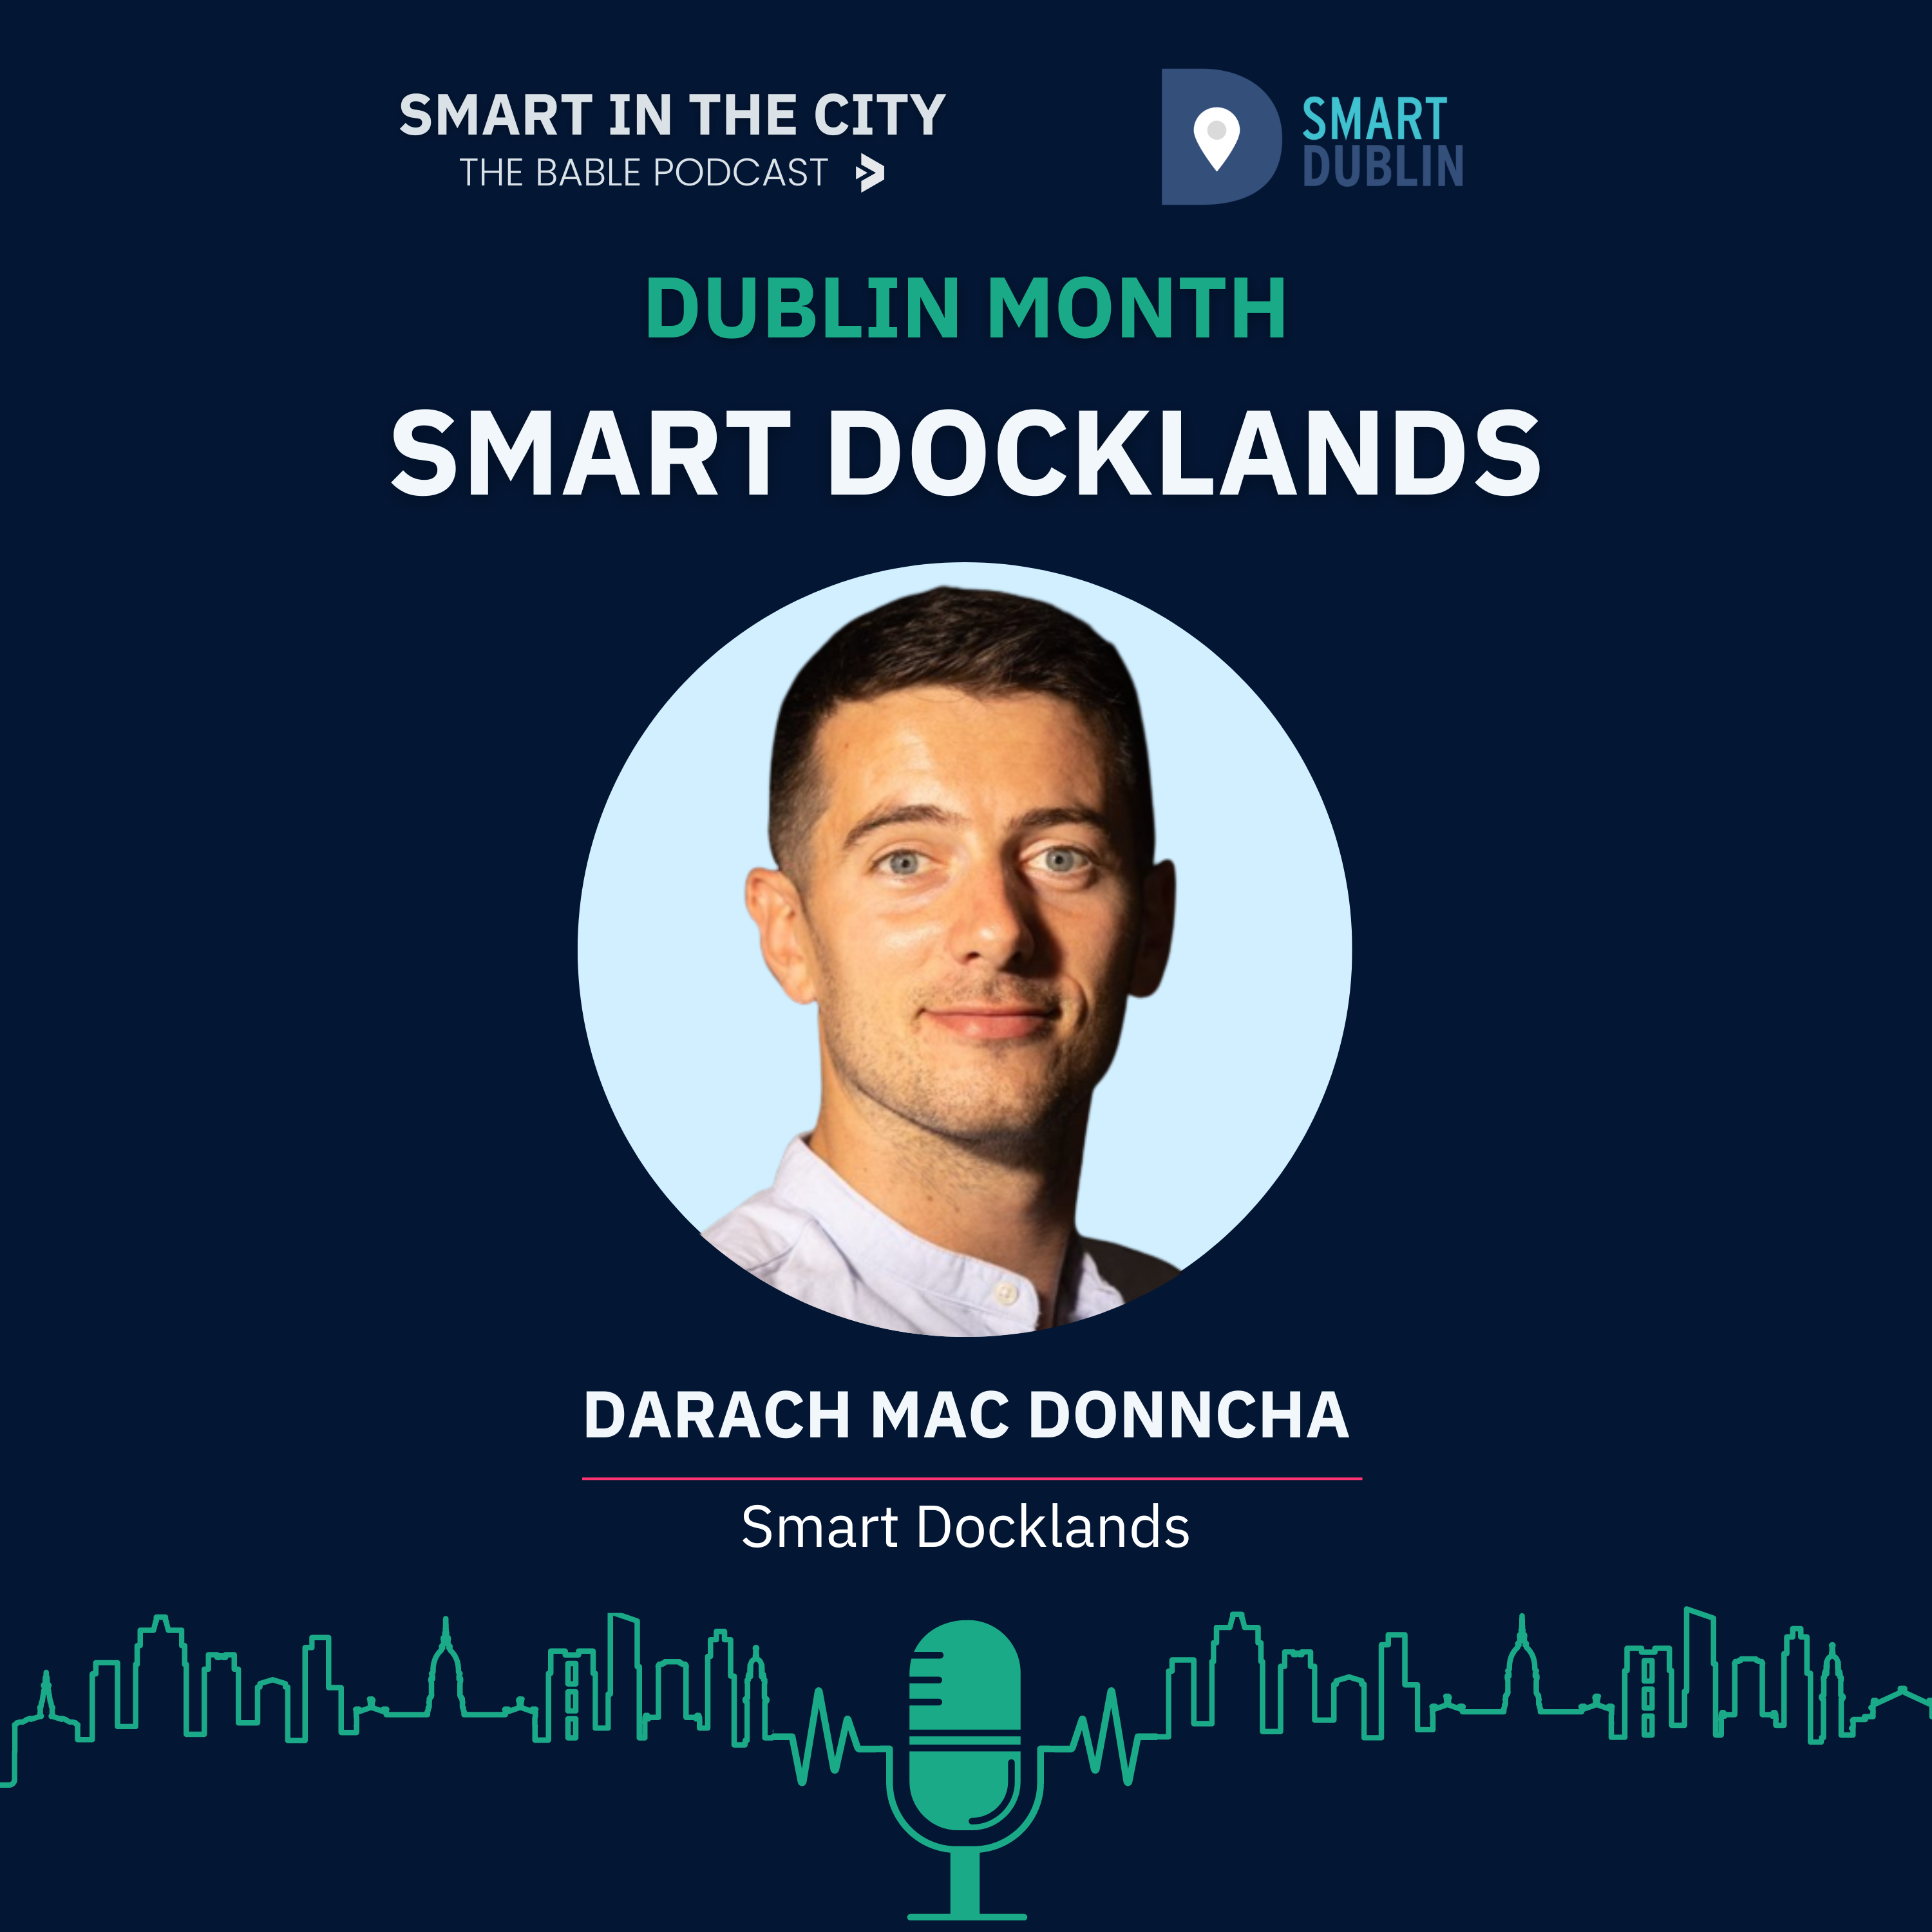 Dublin Month #5 - Smart Docklands: "Education, Engagement and Connectivity"